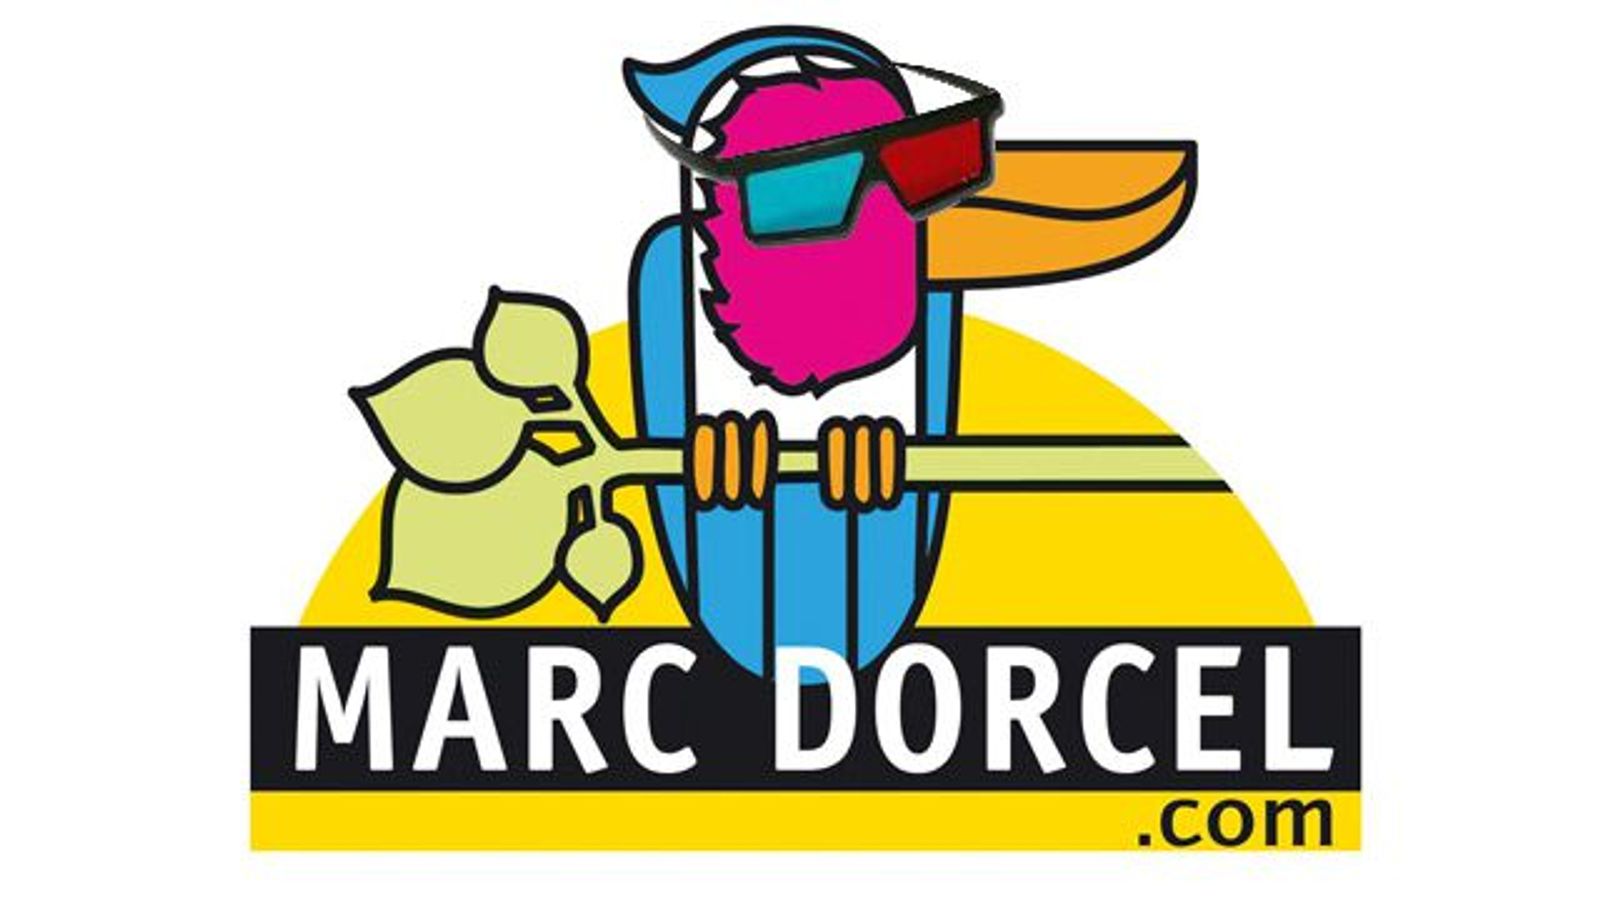 Marc Dorcel Offers 3D Video Downloads Without DRM